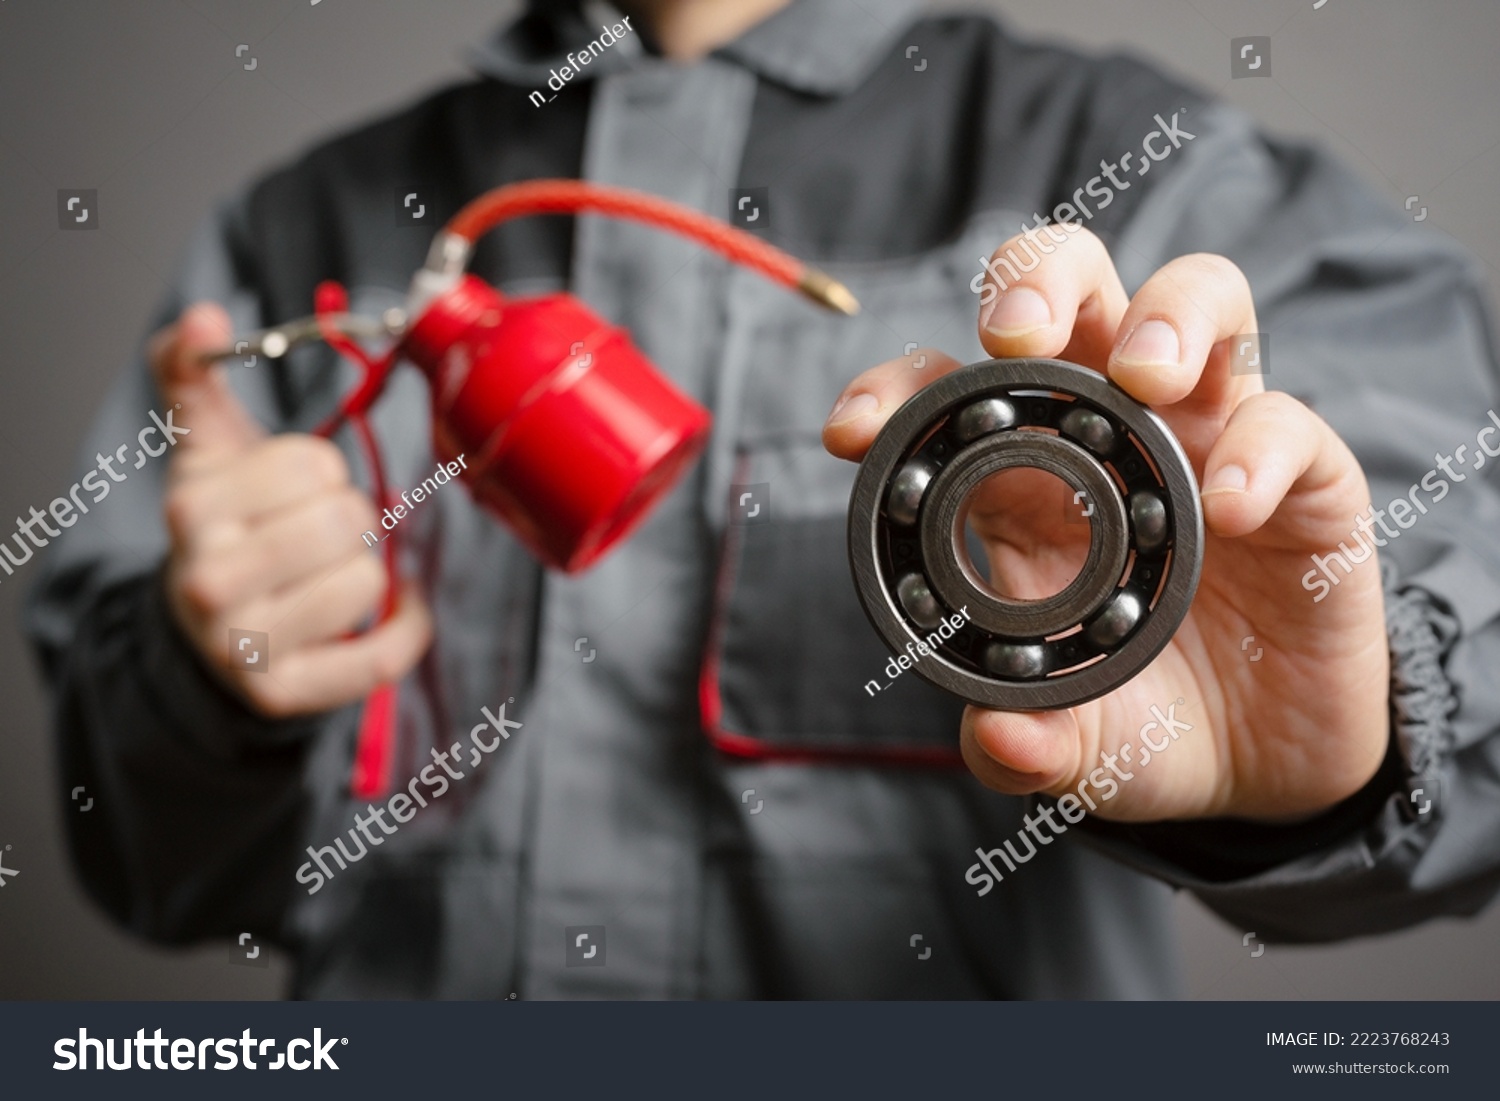 Car service worker holding in hands a red oil can and car parts on dark background closeup. #2223768243